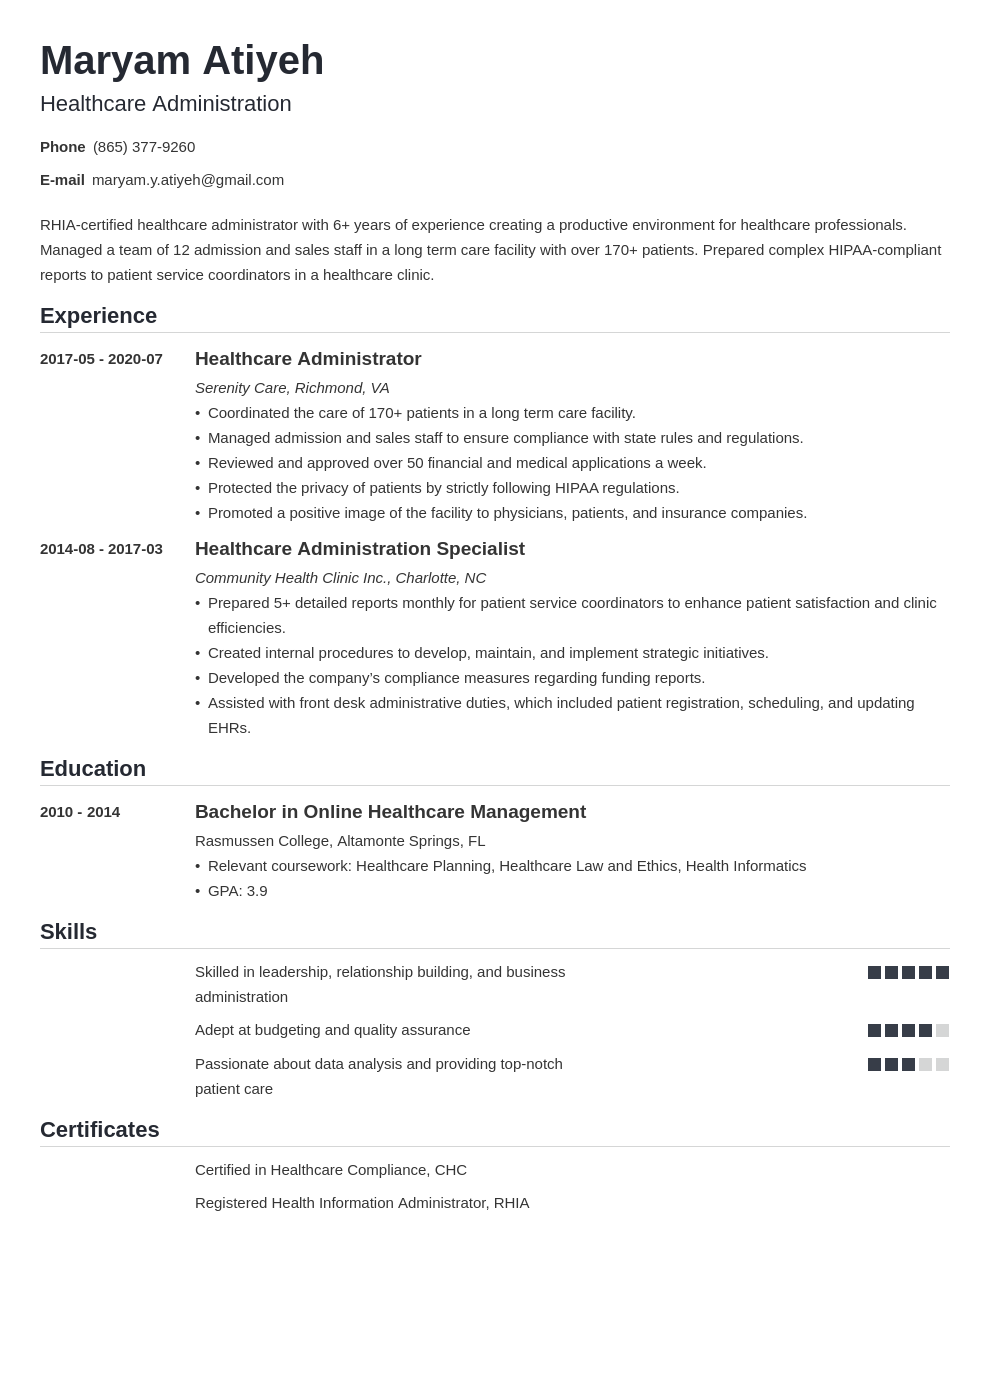 resume objective examples for healthcare administration